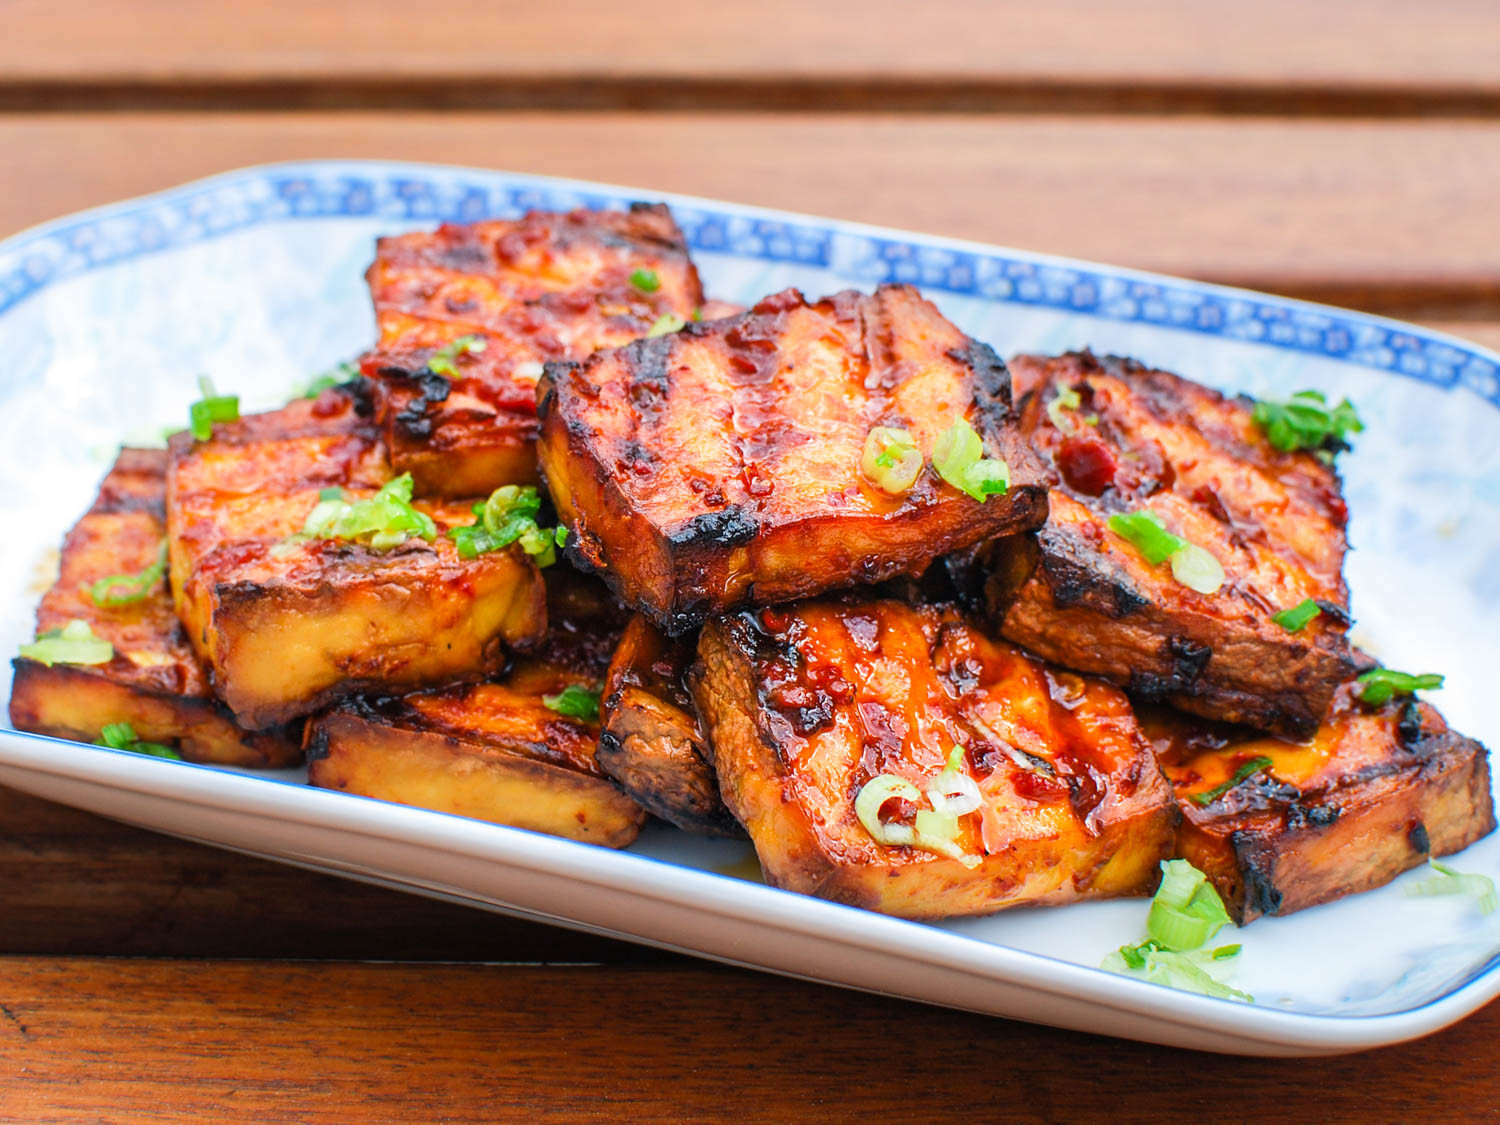 Japanese Pork Tofu Recipes
 Cuisines Collide in This Grilled Tofu With Chipotle Miso